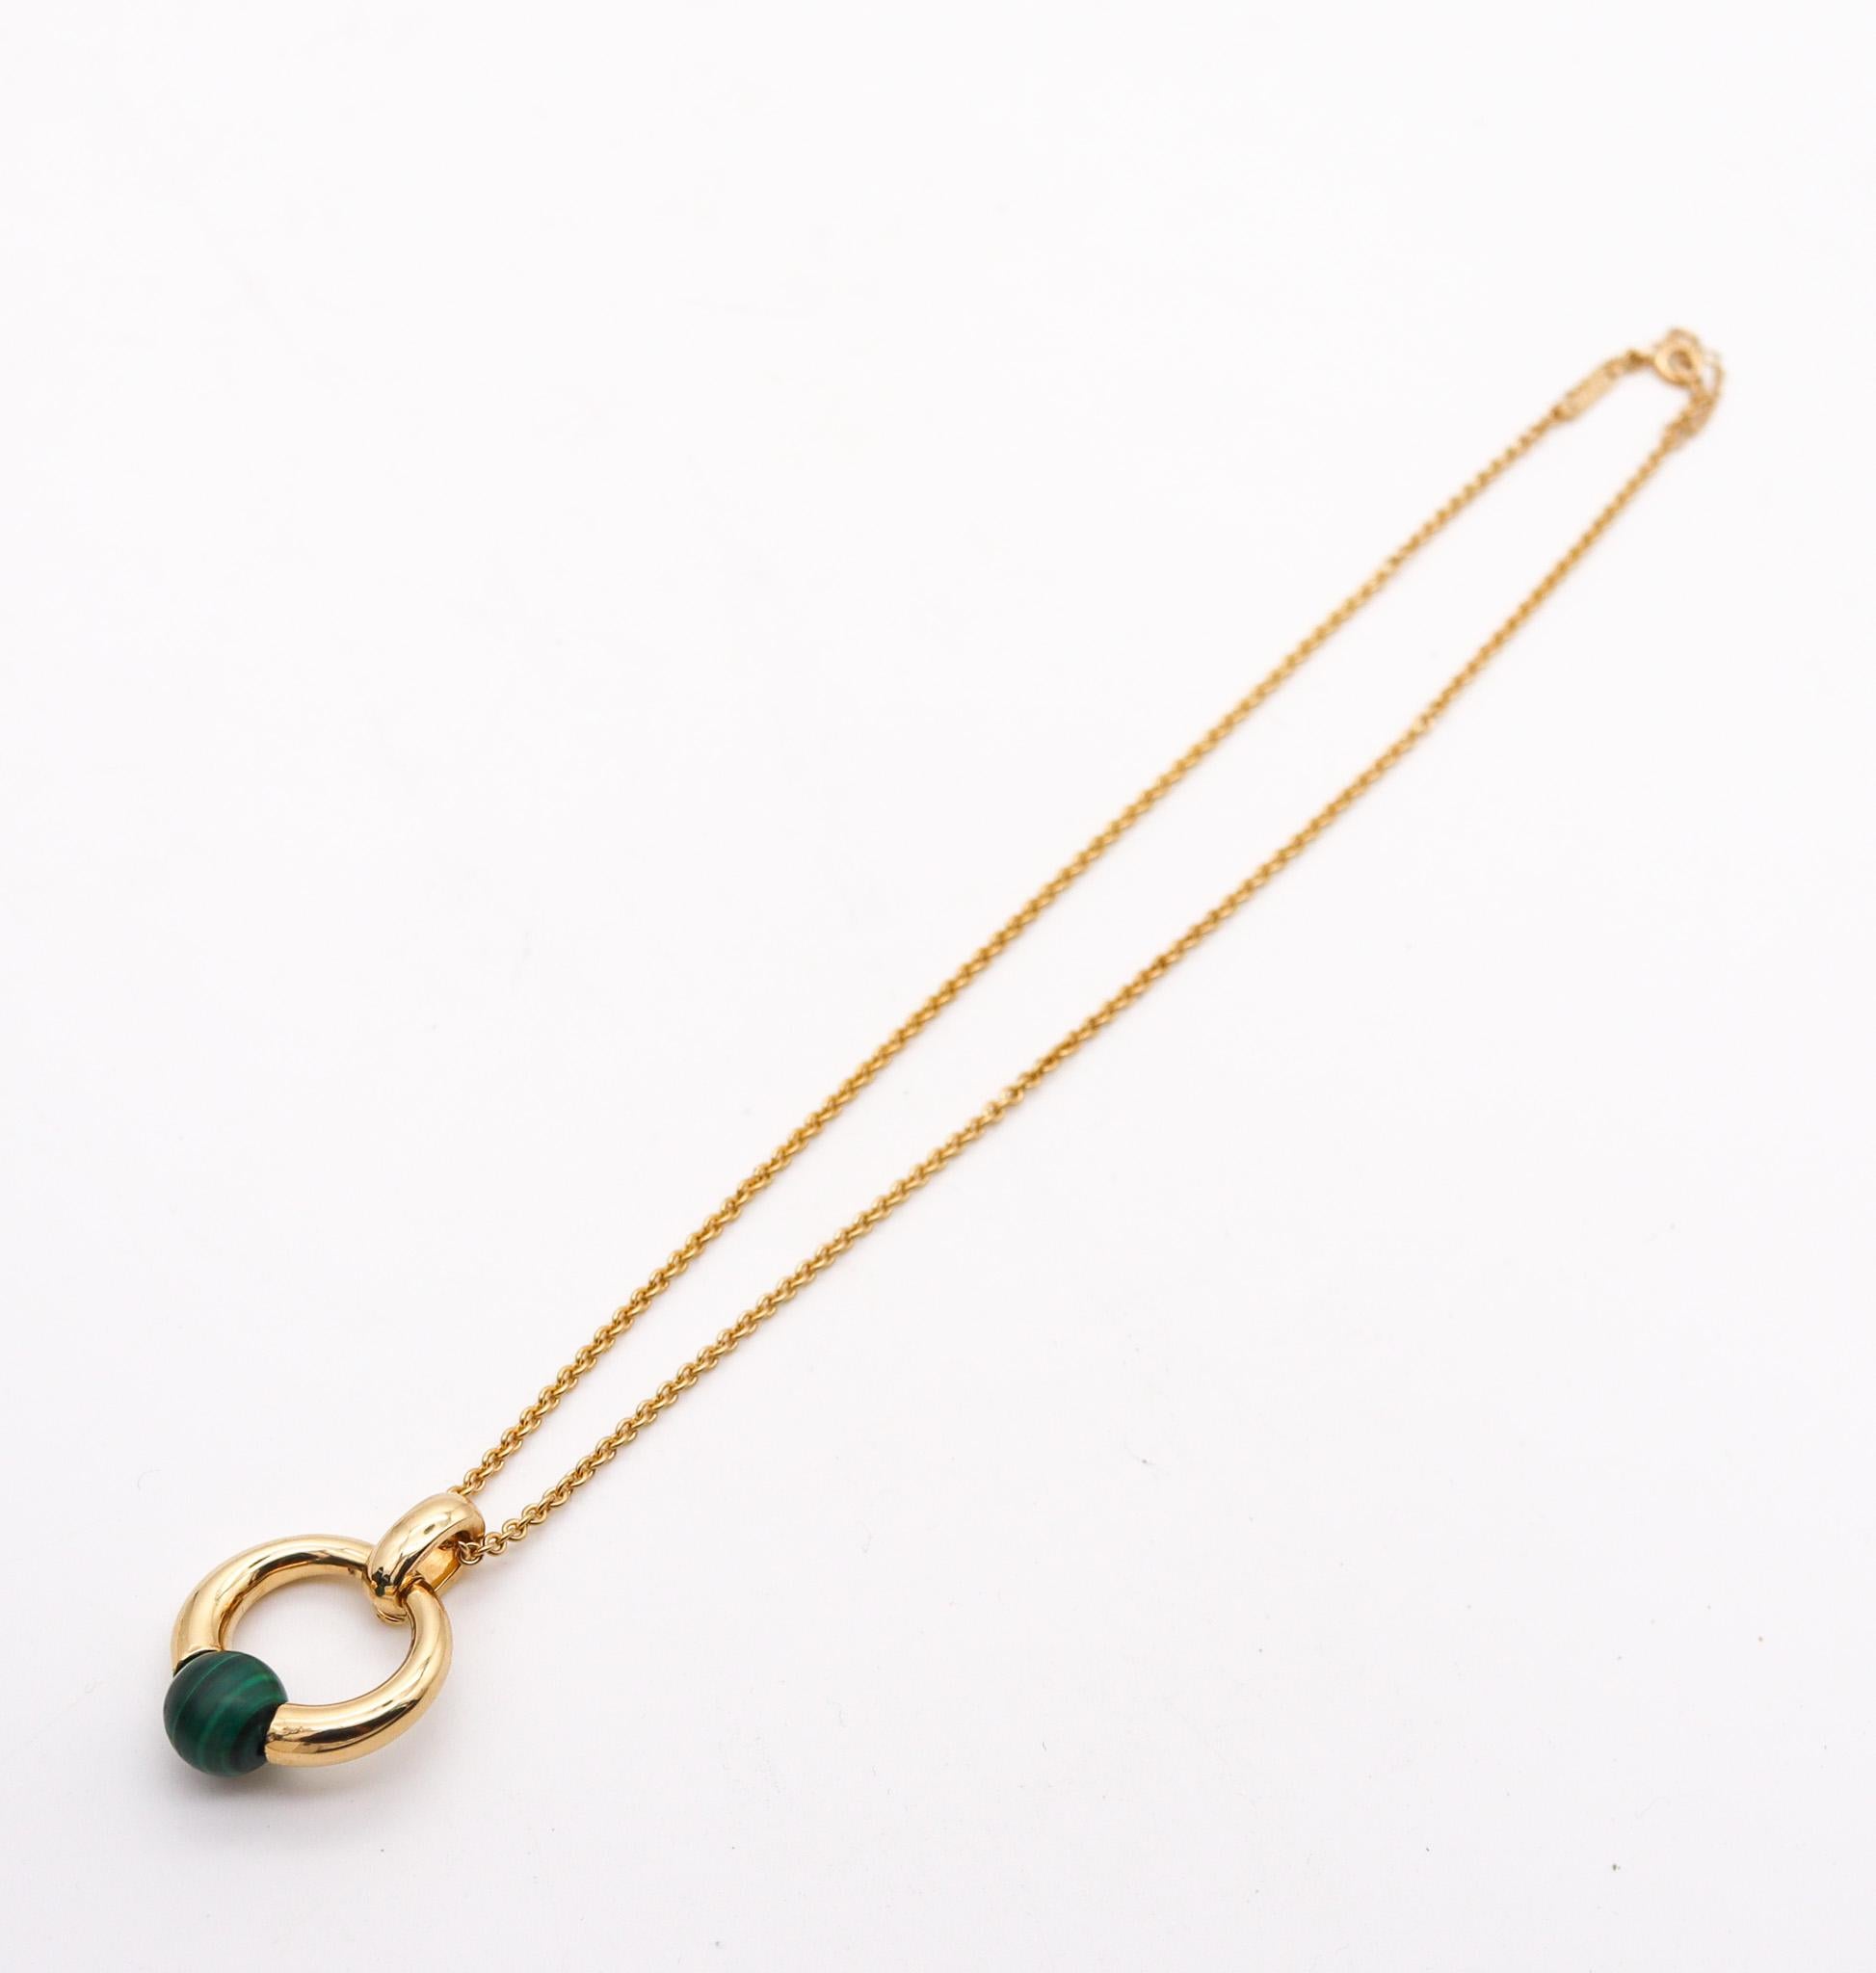 Malachite necklace pendant designed by Cartier.

This is a very rare and very hard to find necklace-pendant, created in Paris France by the jewelry house of Cartier. It was carefully crafted back in the late 20th century in solid yellow gold of 18